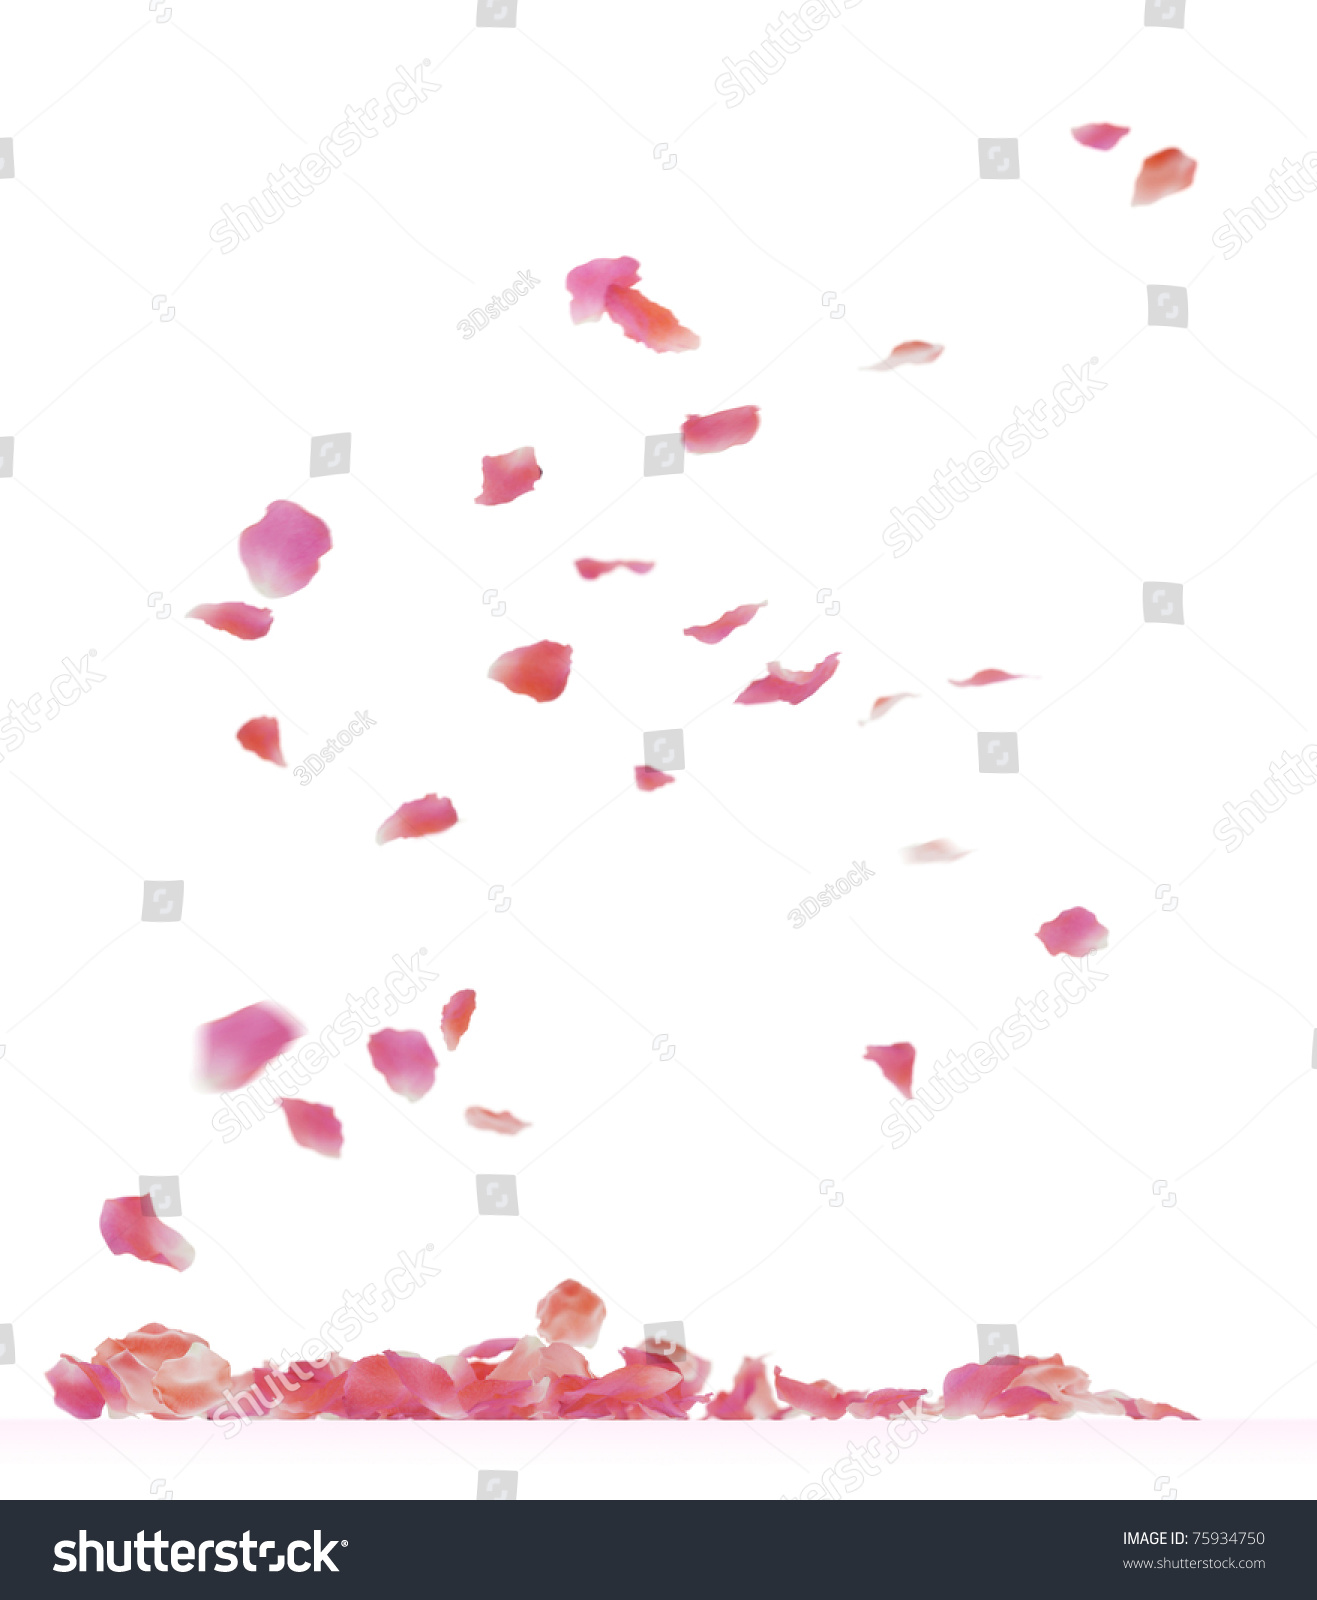 Falling rose petals. 3d rendering isolated on white background. #75934750